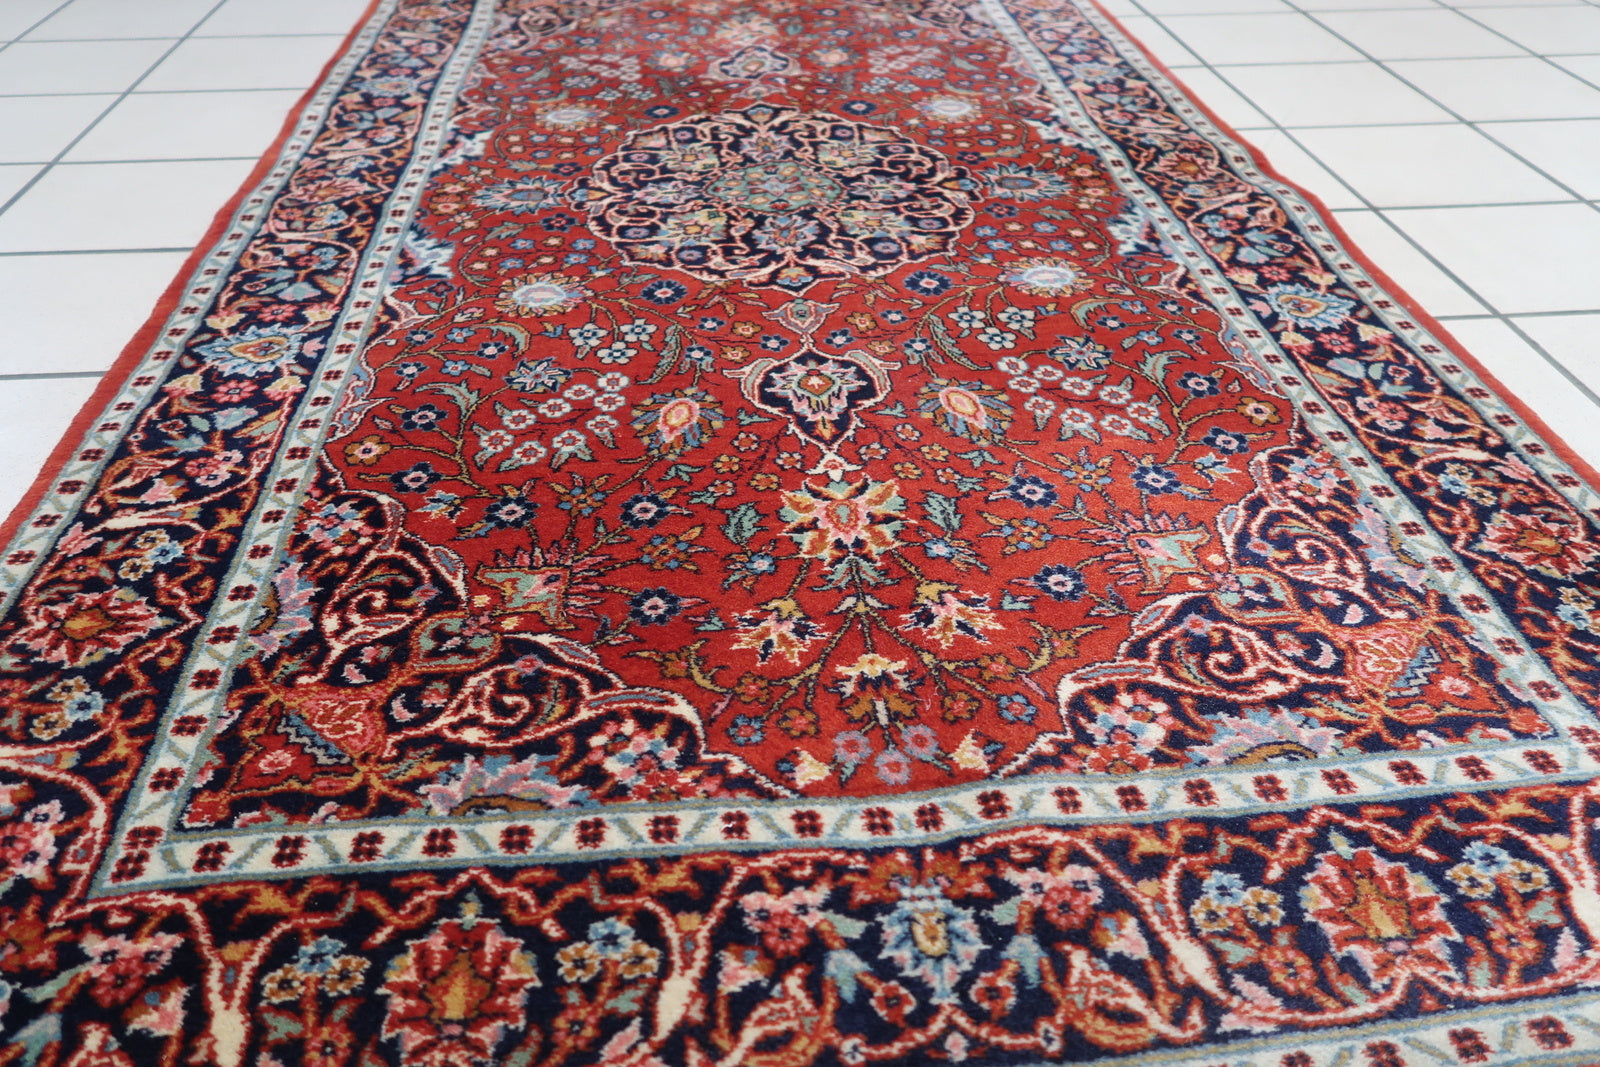 Detailed picture showcasing the historical significance and cultural heritage of the antique Persian Kashan rug.